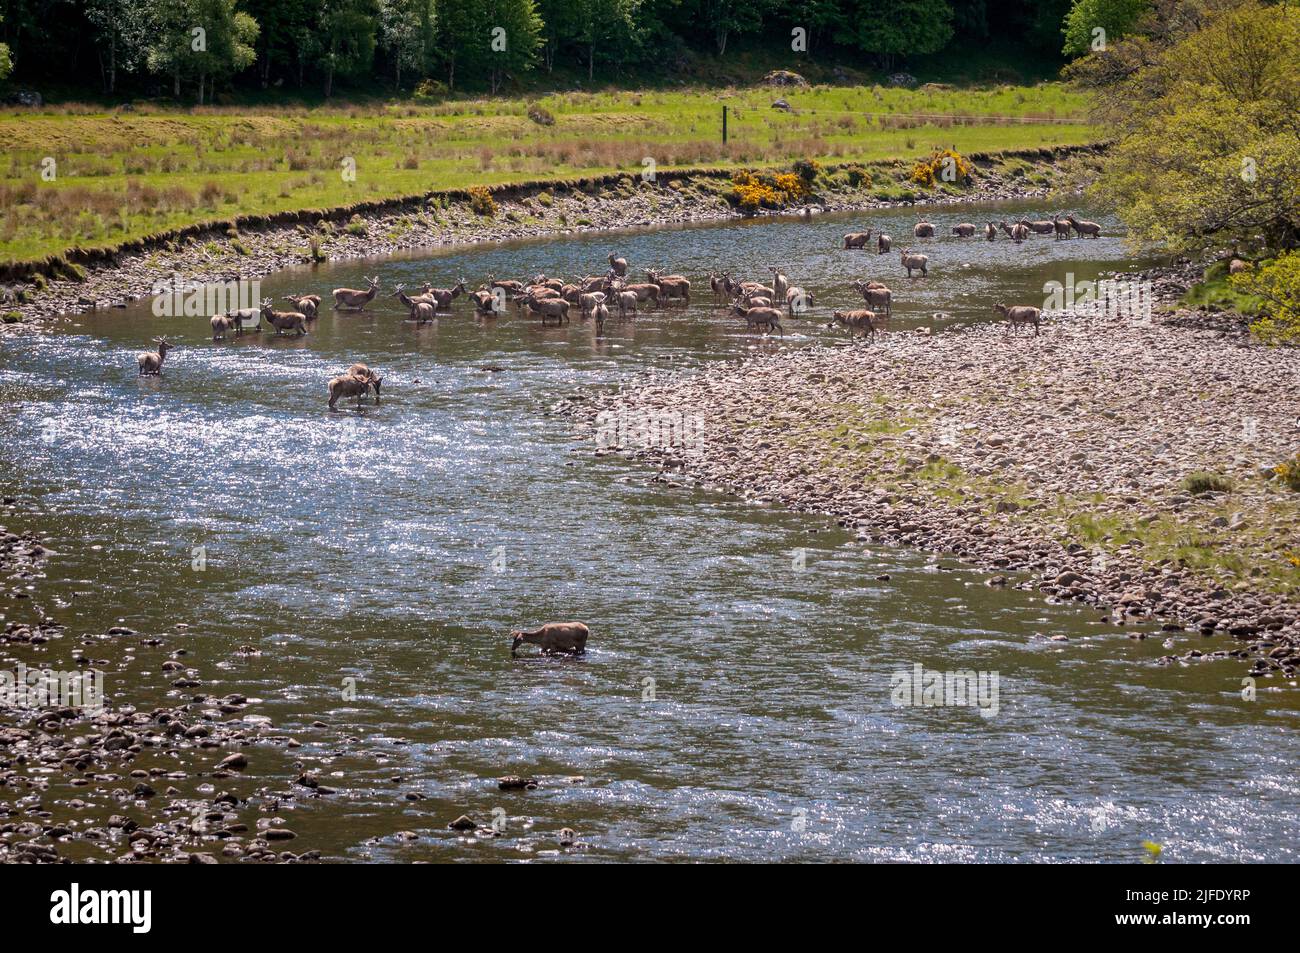 A summer HDR image of a herd of Red Deer Stags, Cervus elaphus scoticus, in the River Meig, Strathconon, Scotland. 02 June 2022 Stock Photo